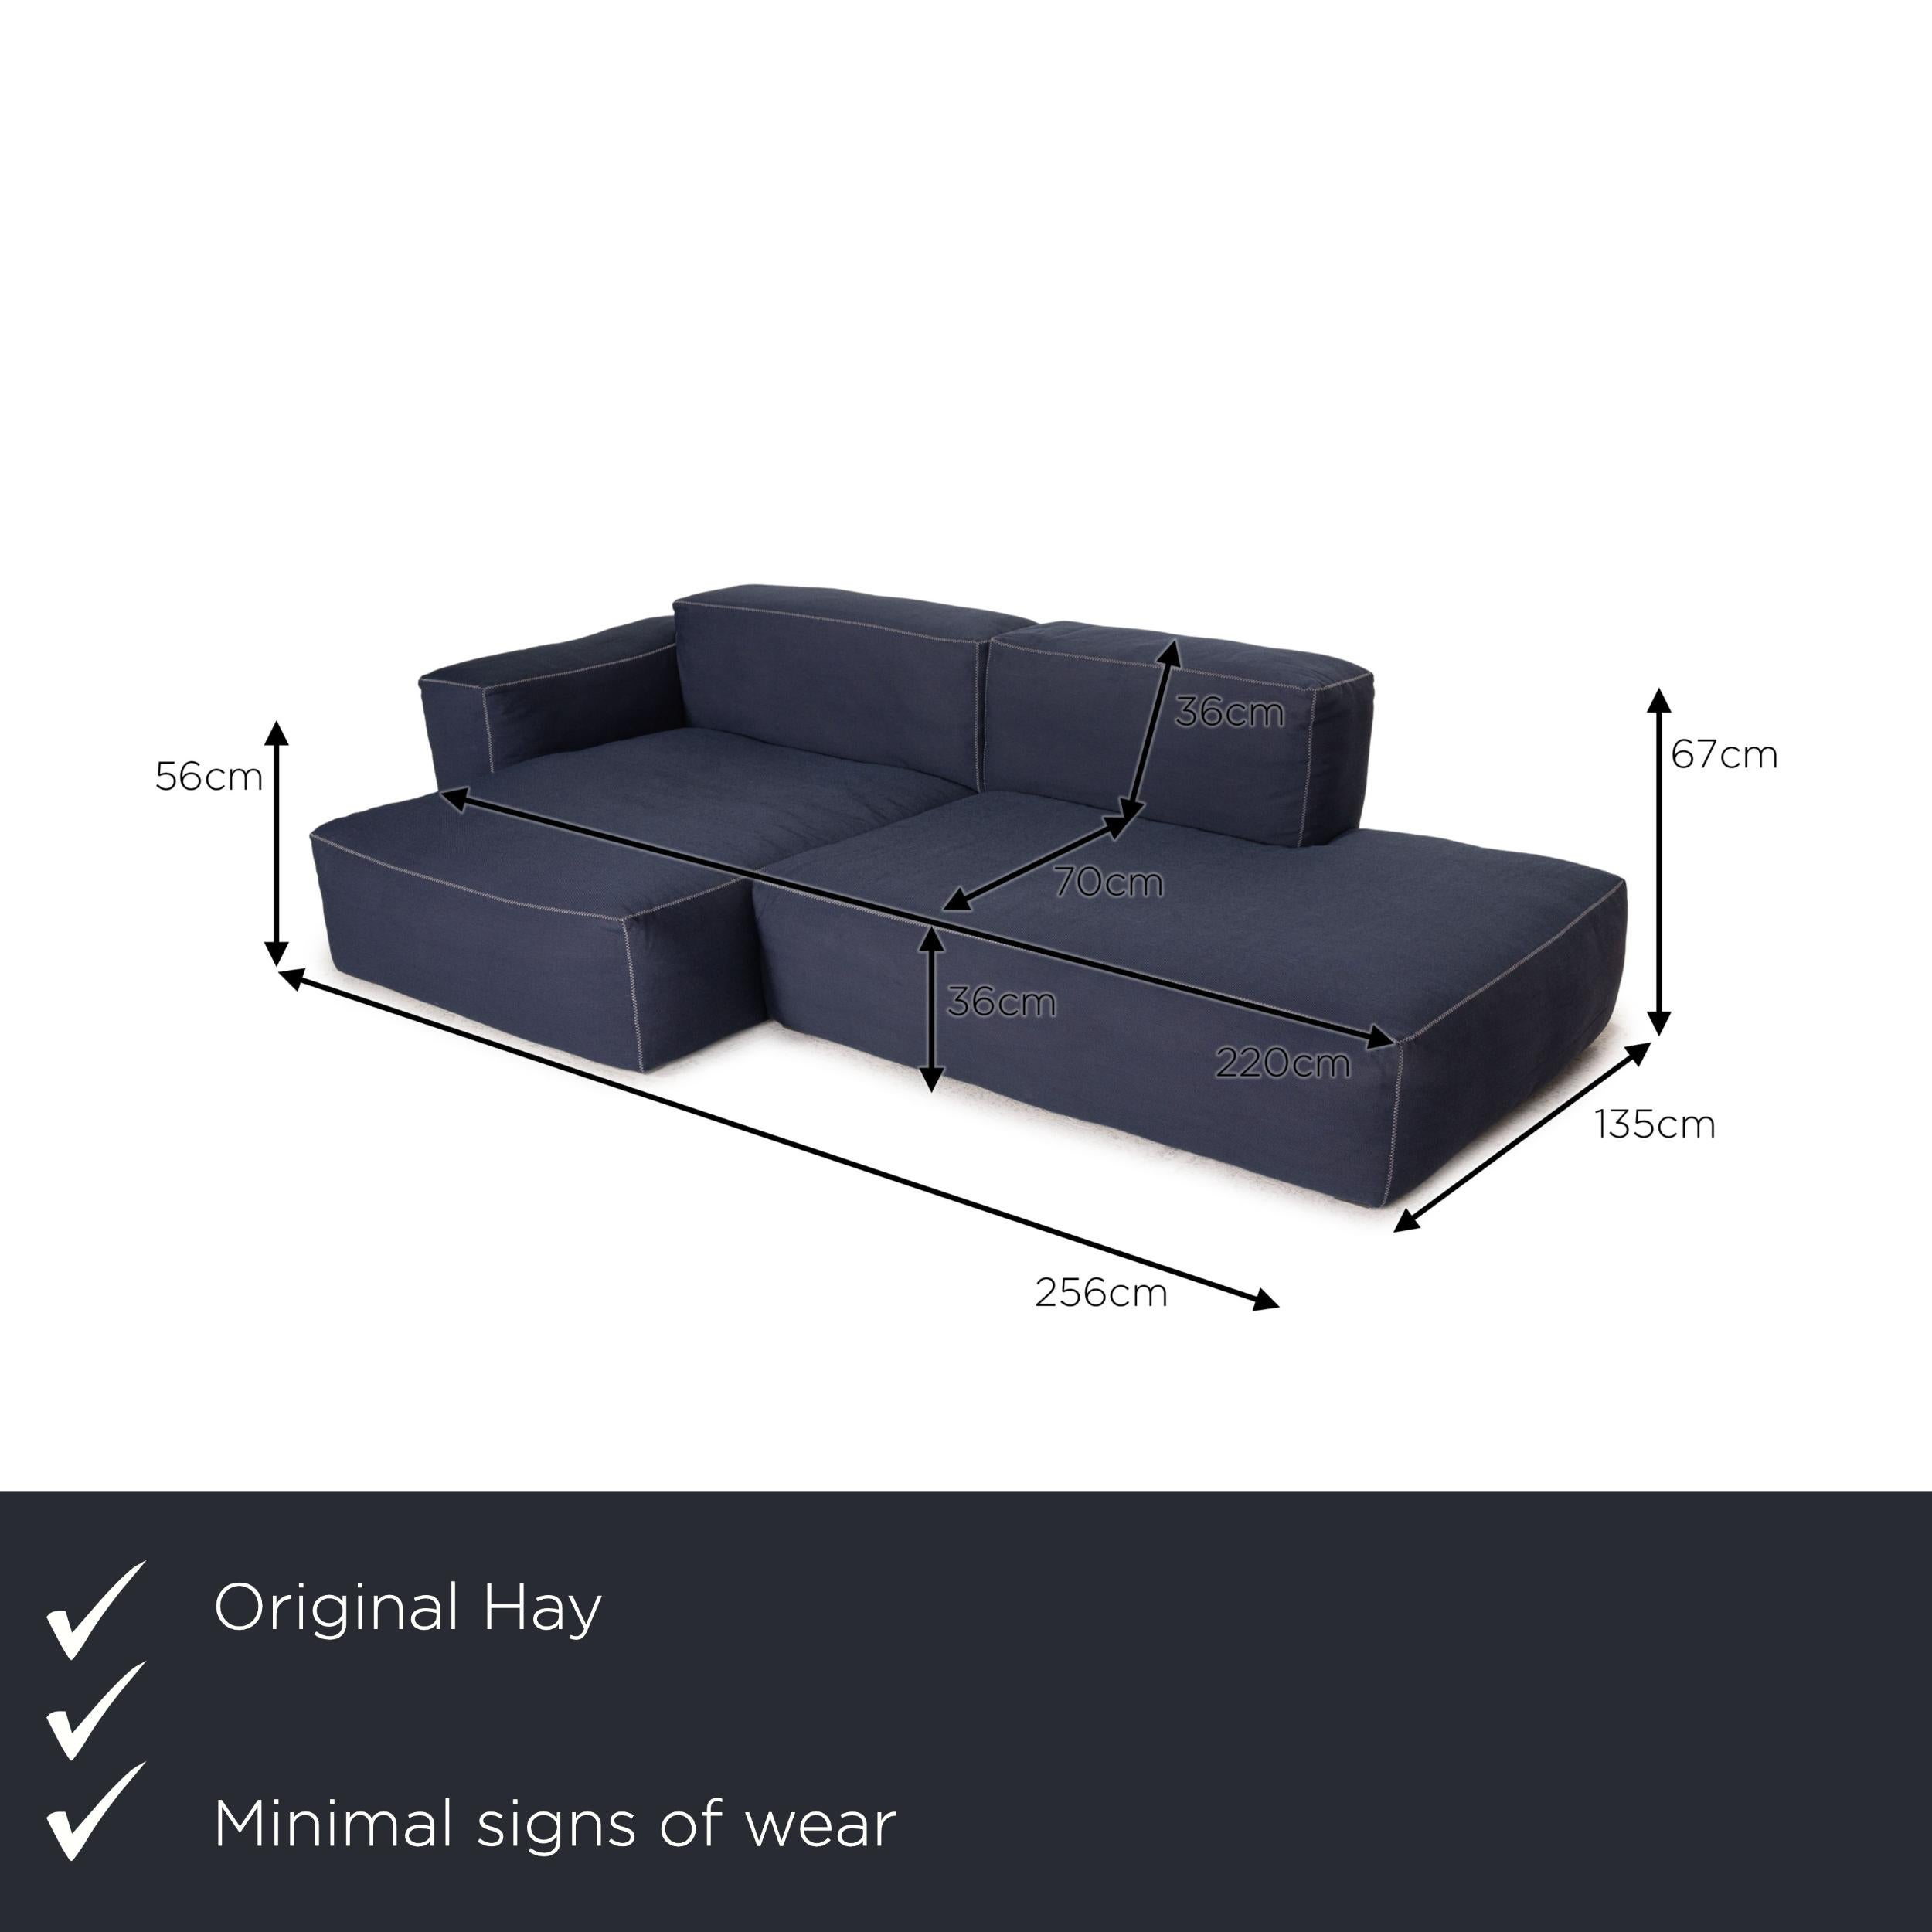 We present to you a Hay Mags fabric sofa blue corner sofa couch.

Product measurements in centimeters:

depth: 135
width: 256
height: 67
seat height: 36
rest height: 56
seat depth: 70
seat width: 220
back height: 36.

 